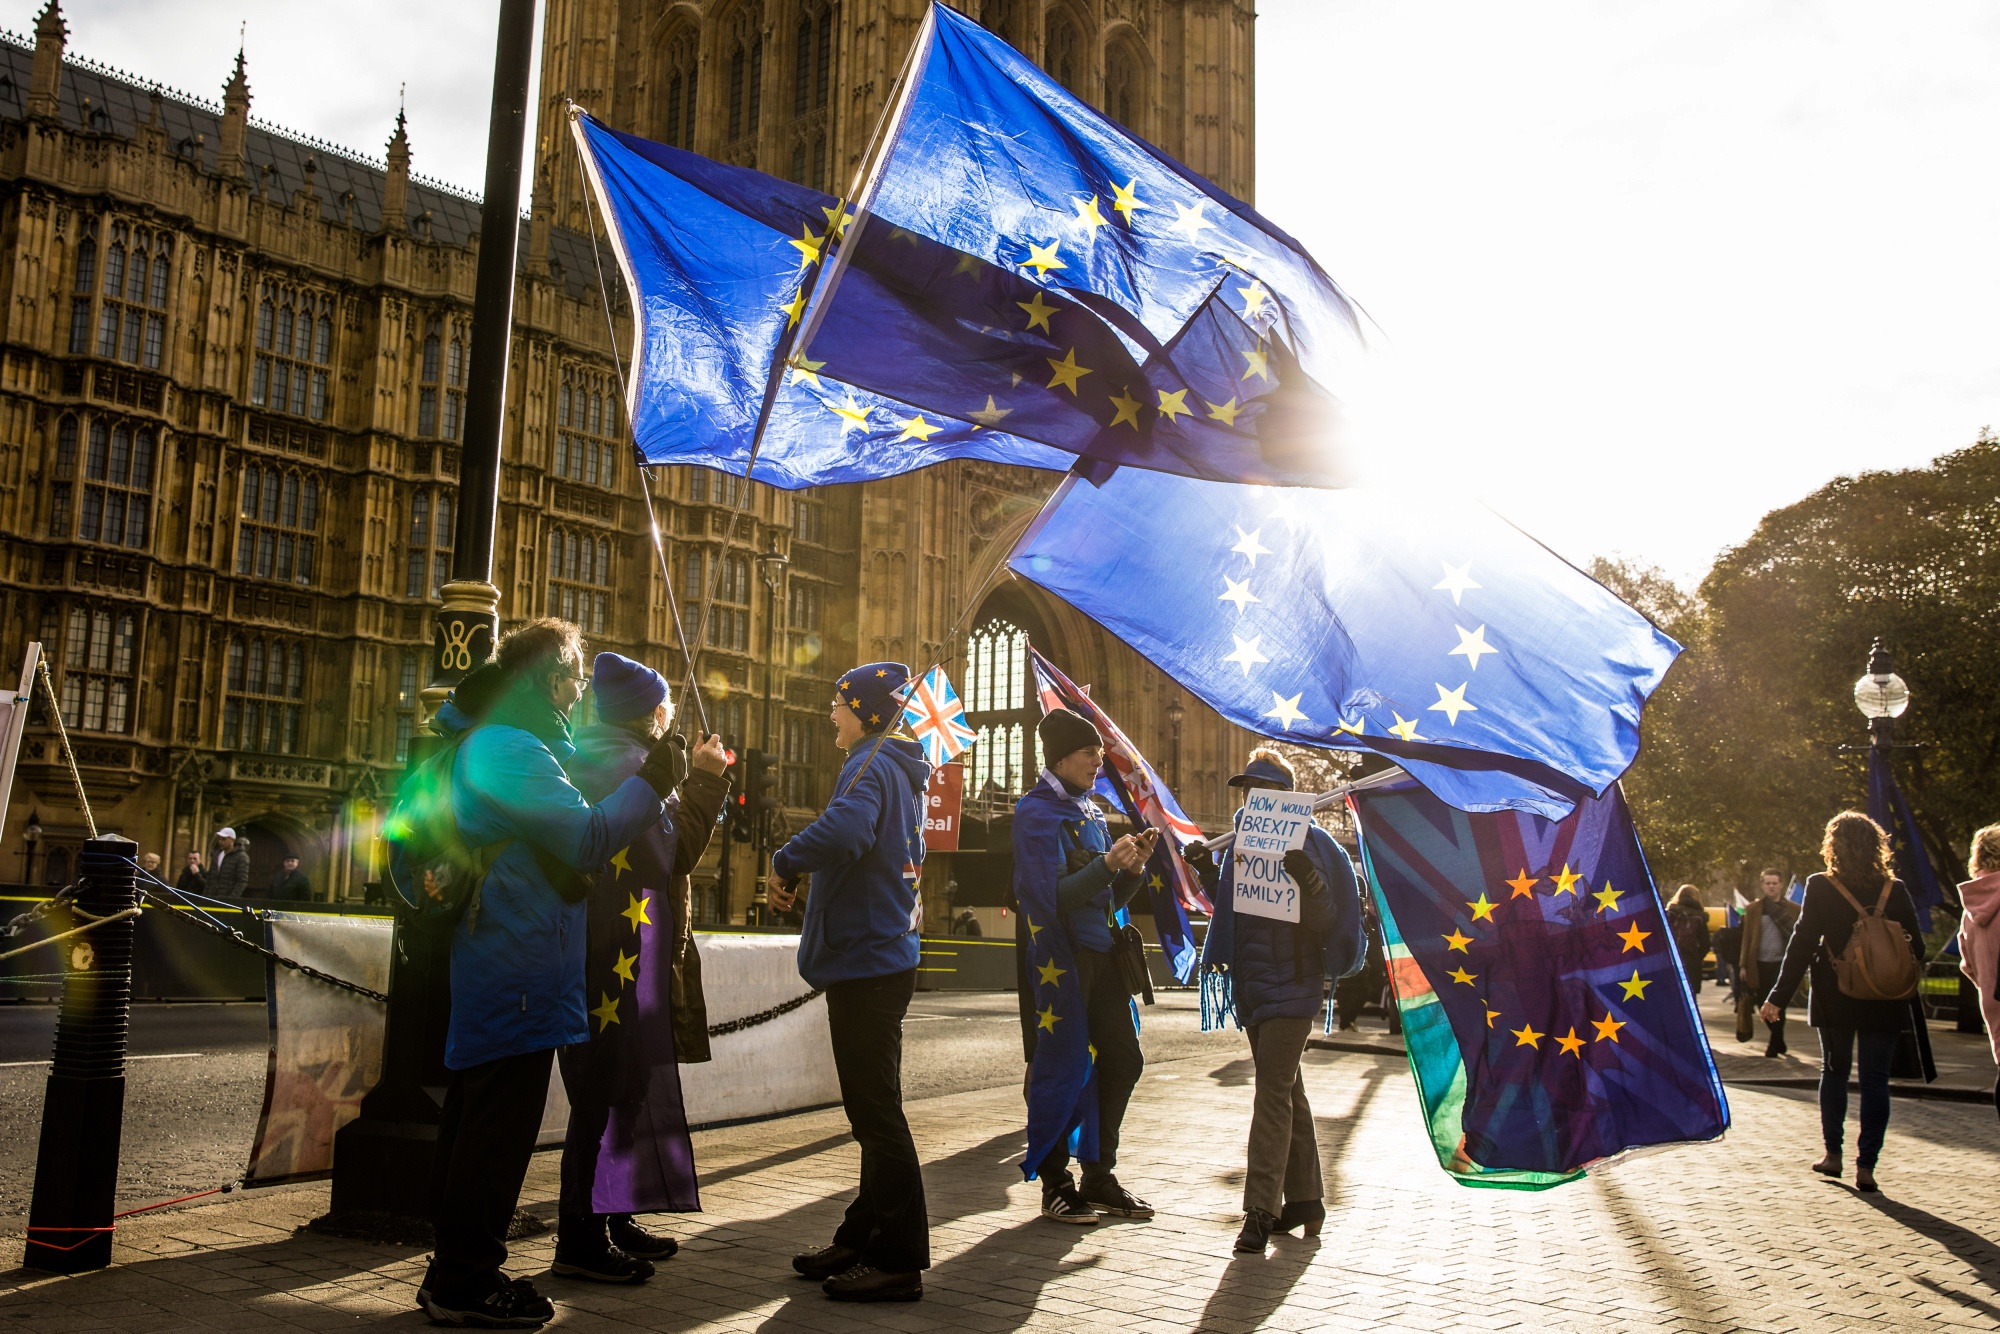 Anti-Brexit demonstrators wave European Union (EU) flags outside the Houses of Parliament in London.